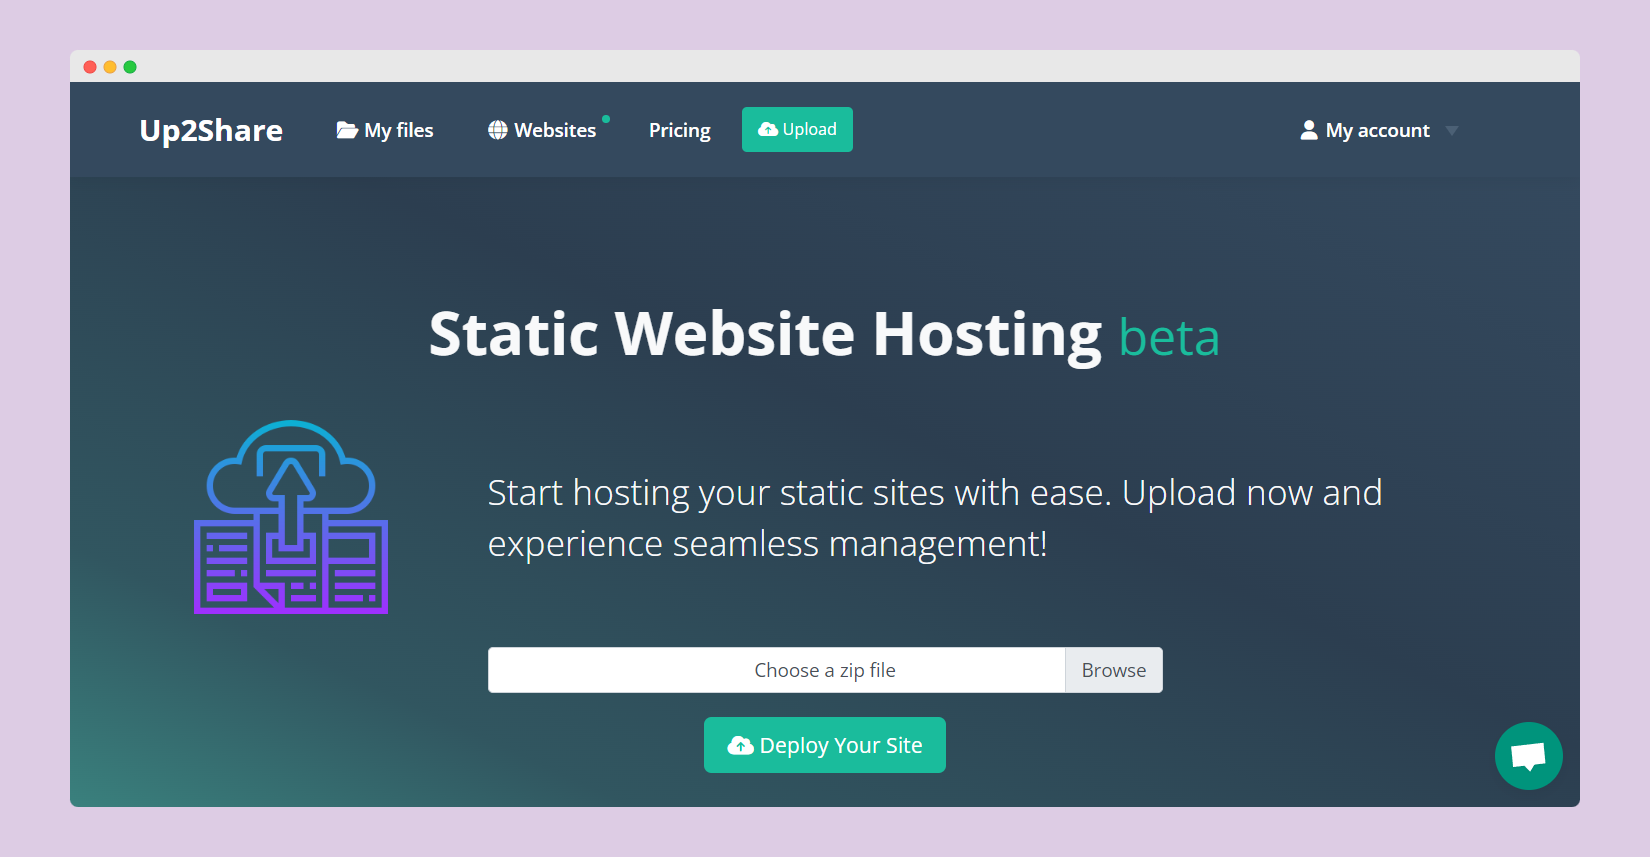 Announcing a New Feature: Static Websites Hosting on Up2Share